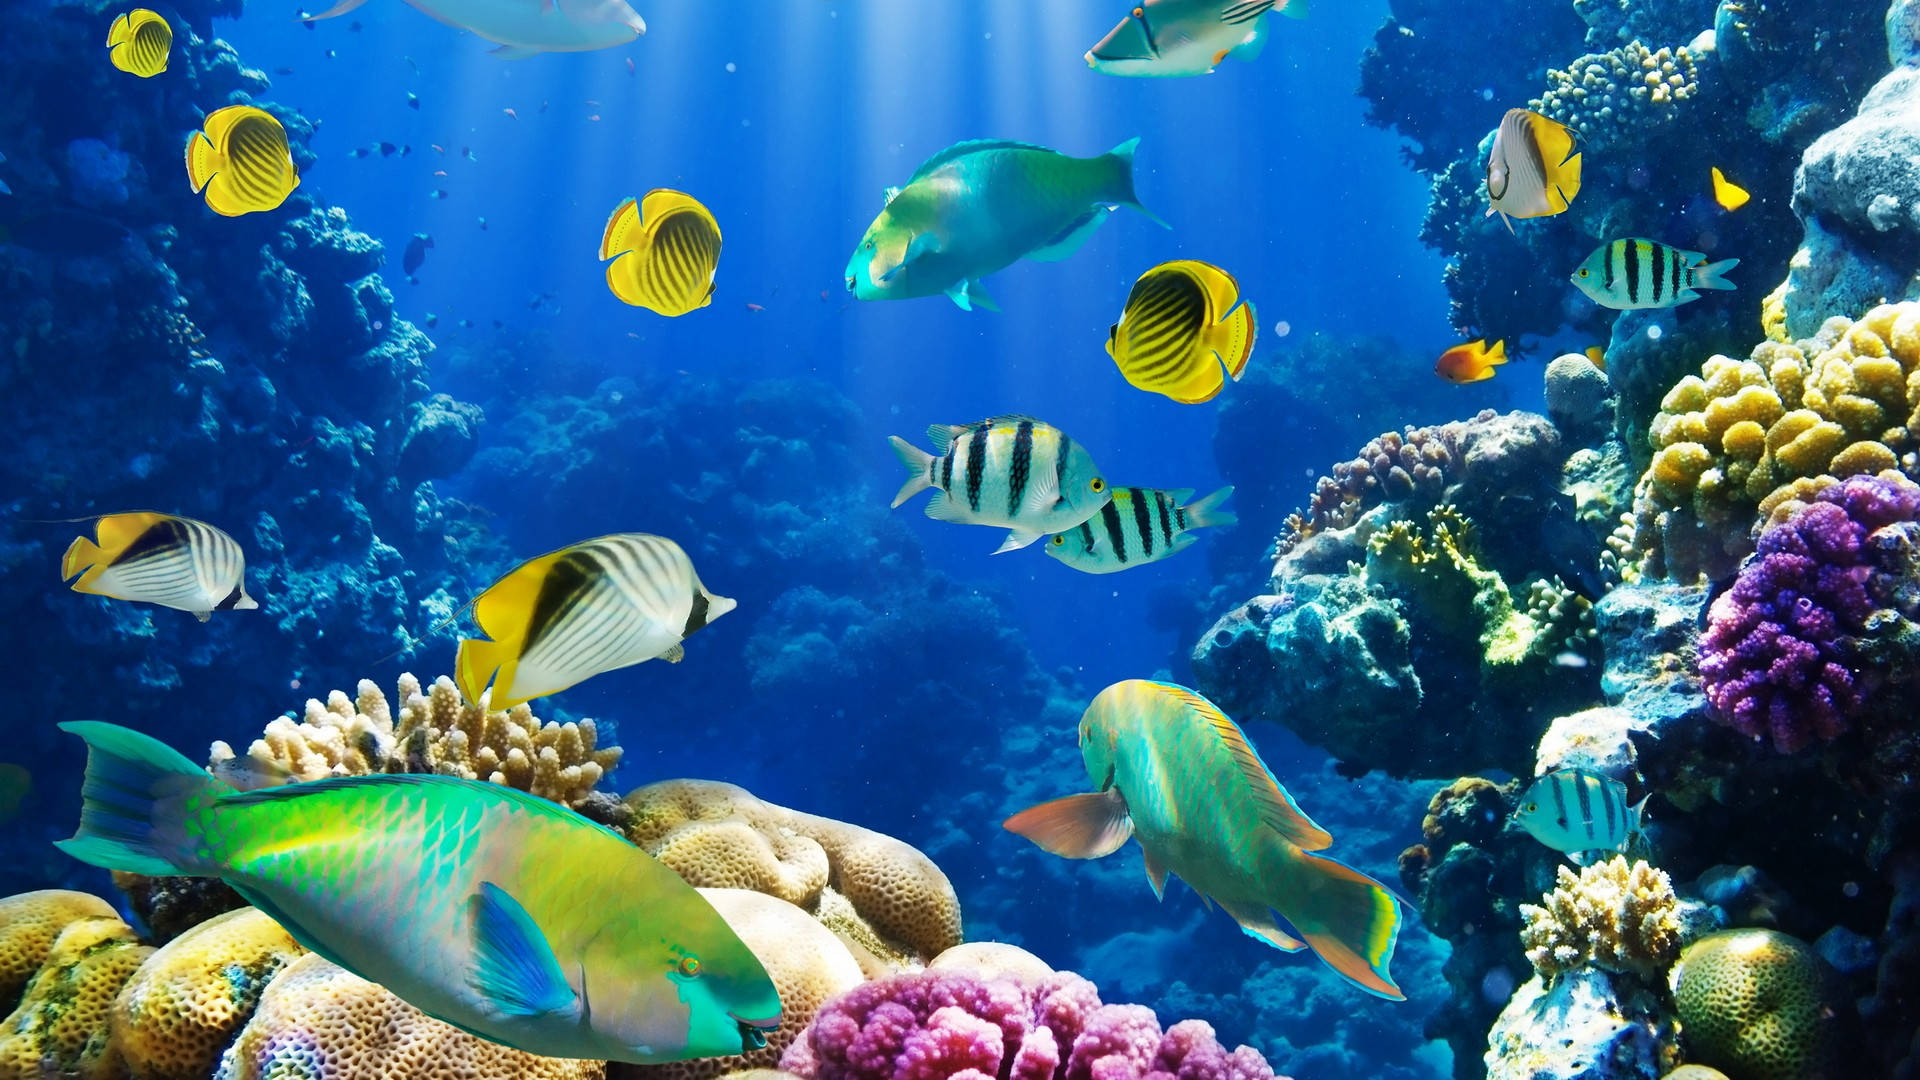 Colorful Fish In The Water Background